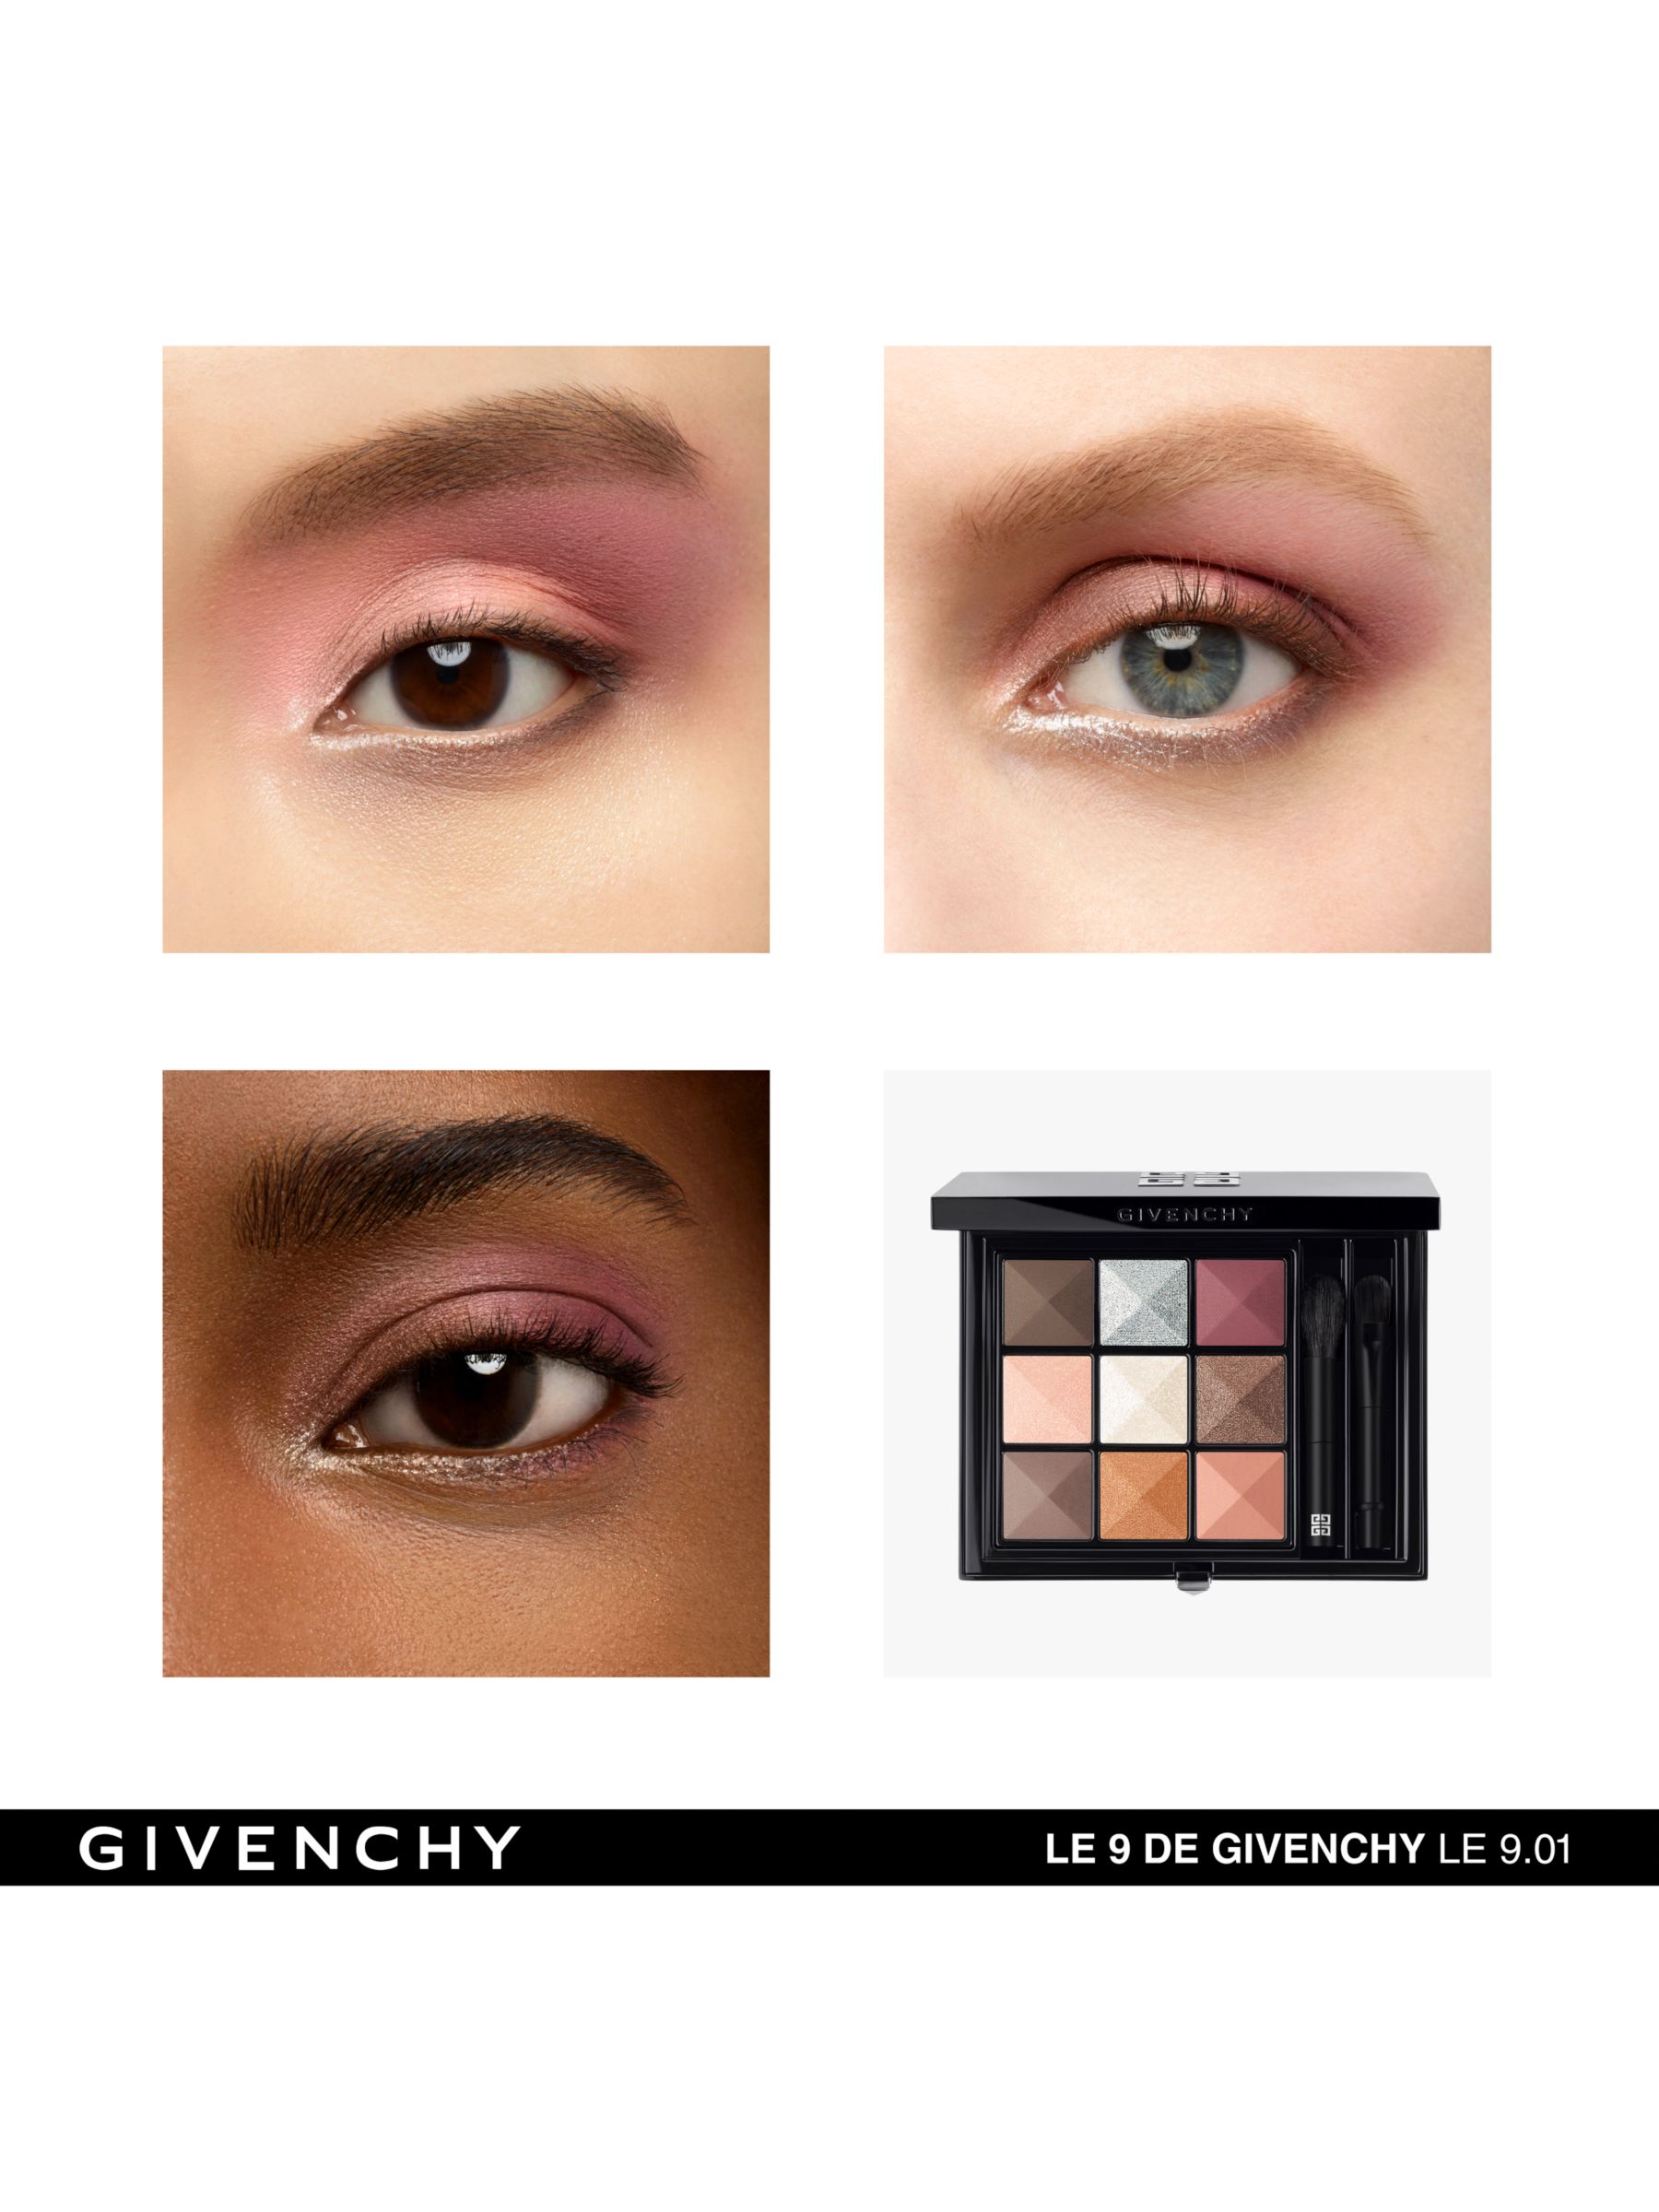 Givenchy Le 9 de Givenchy Multi-Finish Eyeshadow Palette, 9.01 3